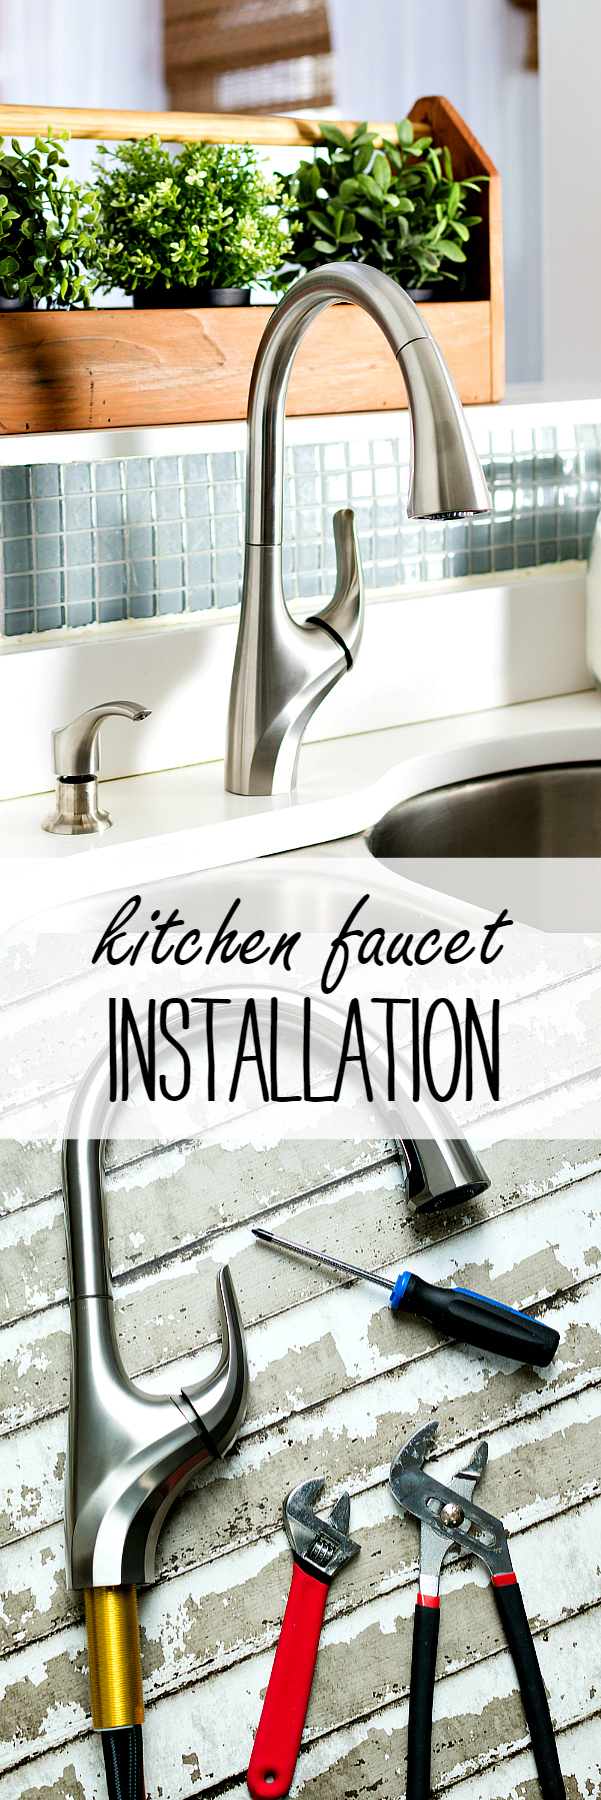 How to Install A Kitchen Faucet